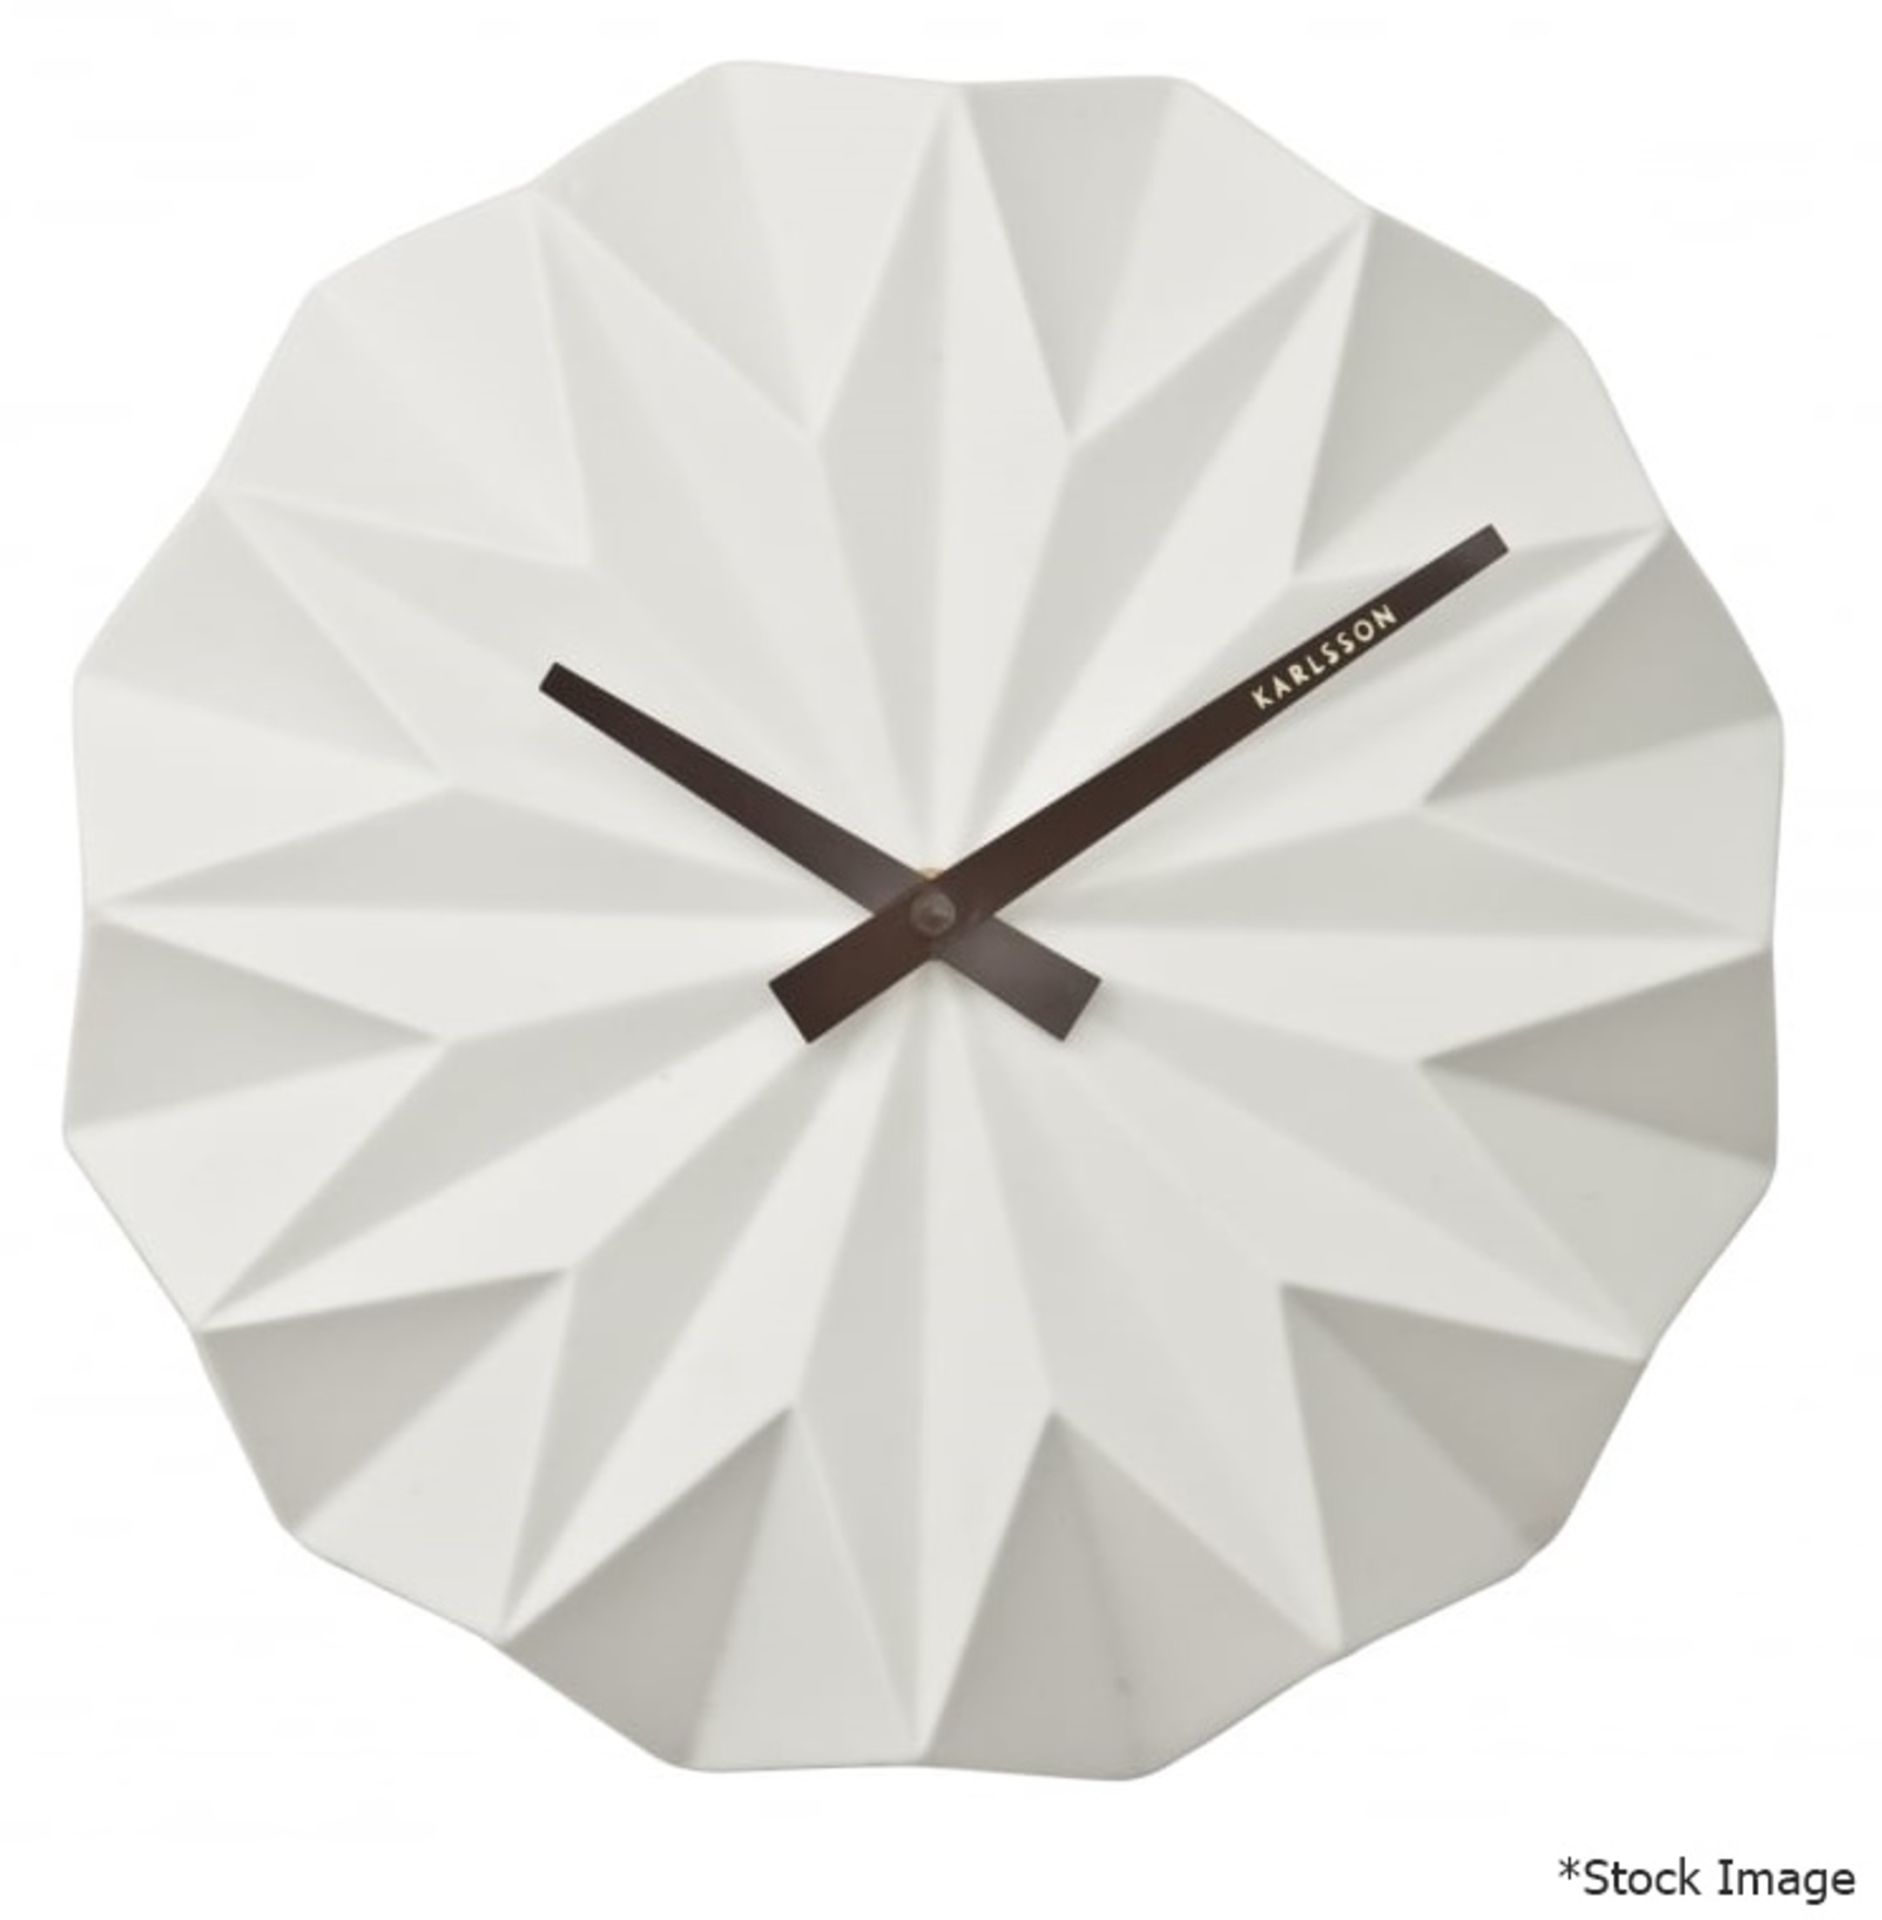 1 x KARLSSON Contemporary Origami Ceramic Silent Grey Wall Clock 27cm - New Boxed Stock